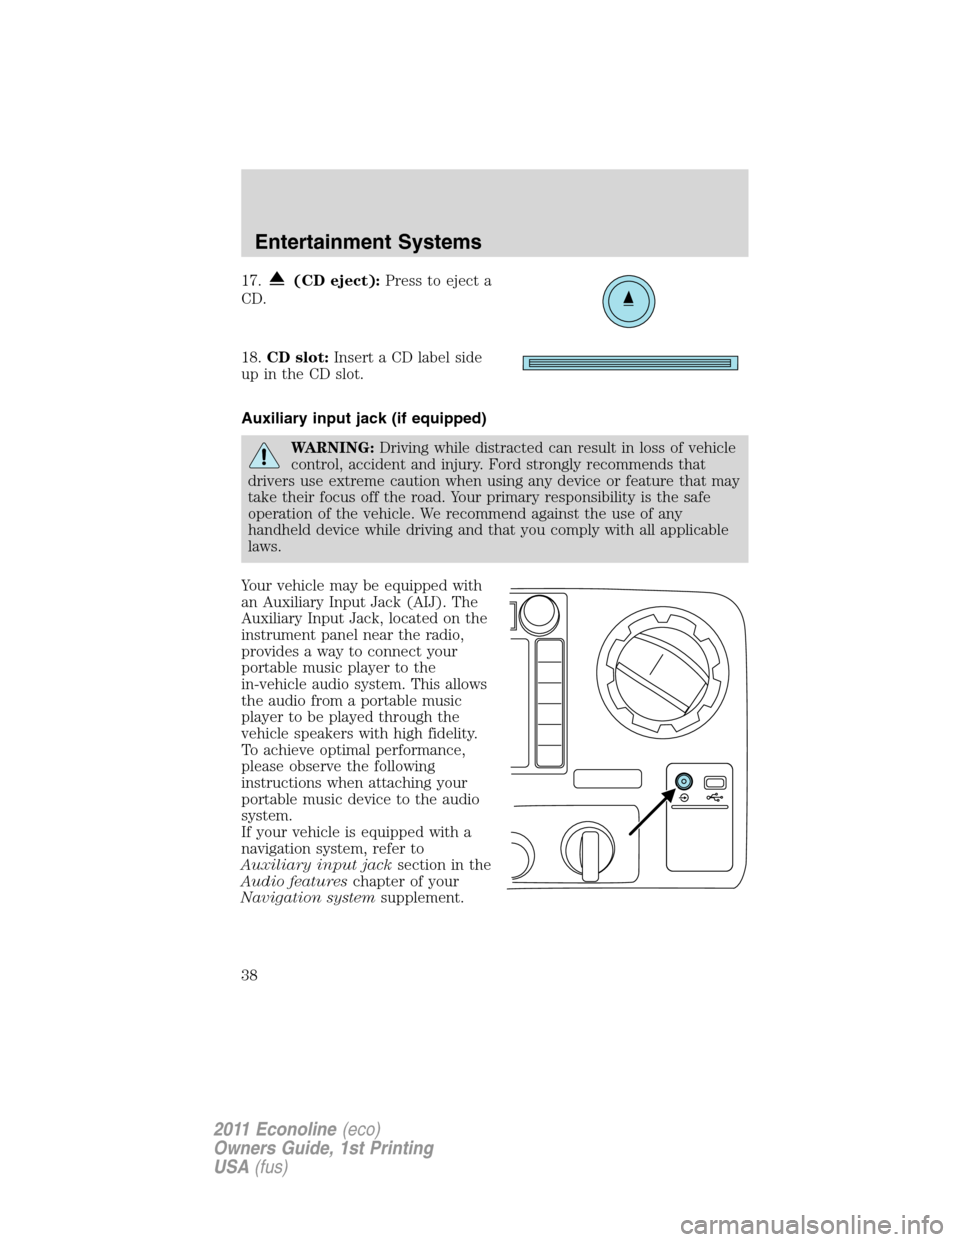 FORD E SERIES 2011 4.G Owners Manual 17.(CD eject):Press to eject a
CD.
18.CD slot:Insert a CD label side
up in the CD slot.
Auxiliary input jack (if equipped)
WARNING:Driving while distracted can result in loss of vehicle
control, accid